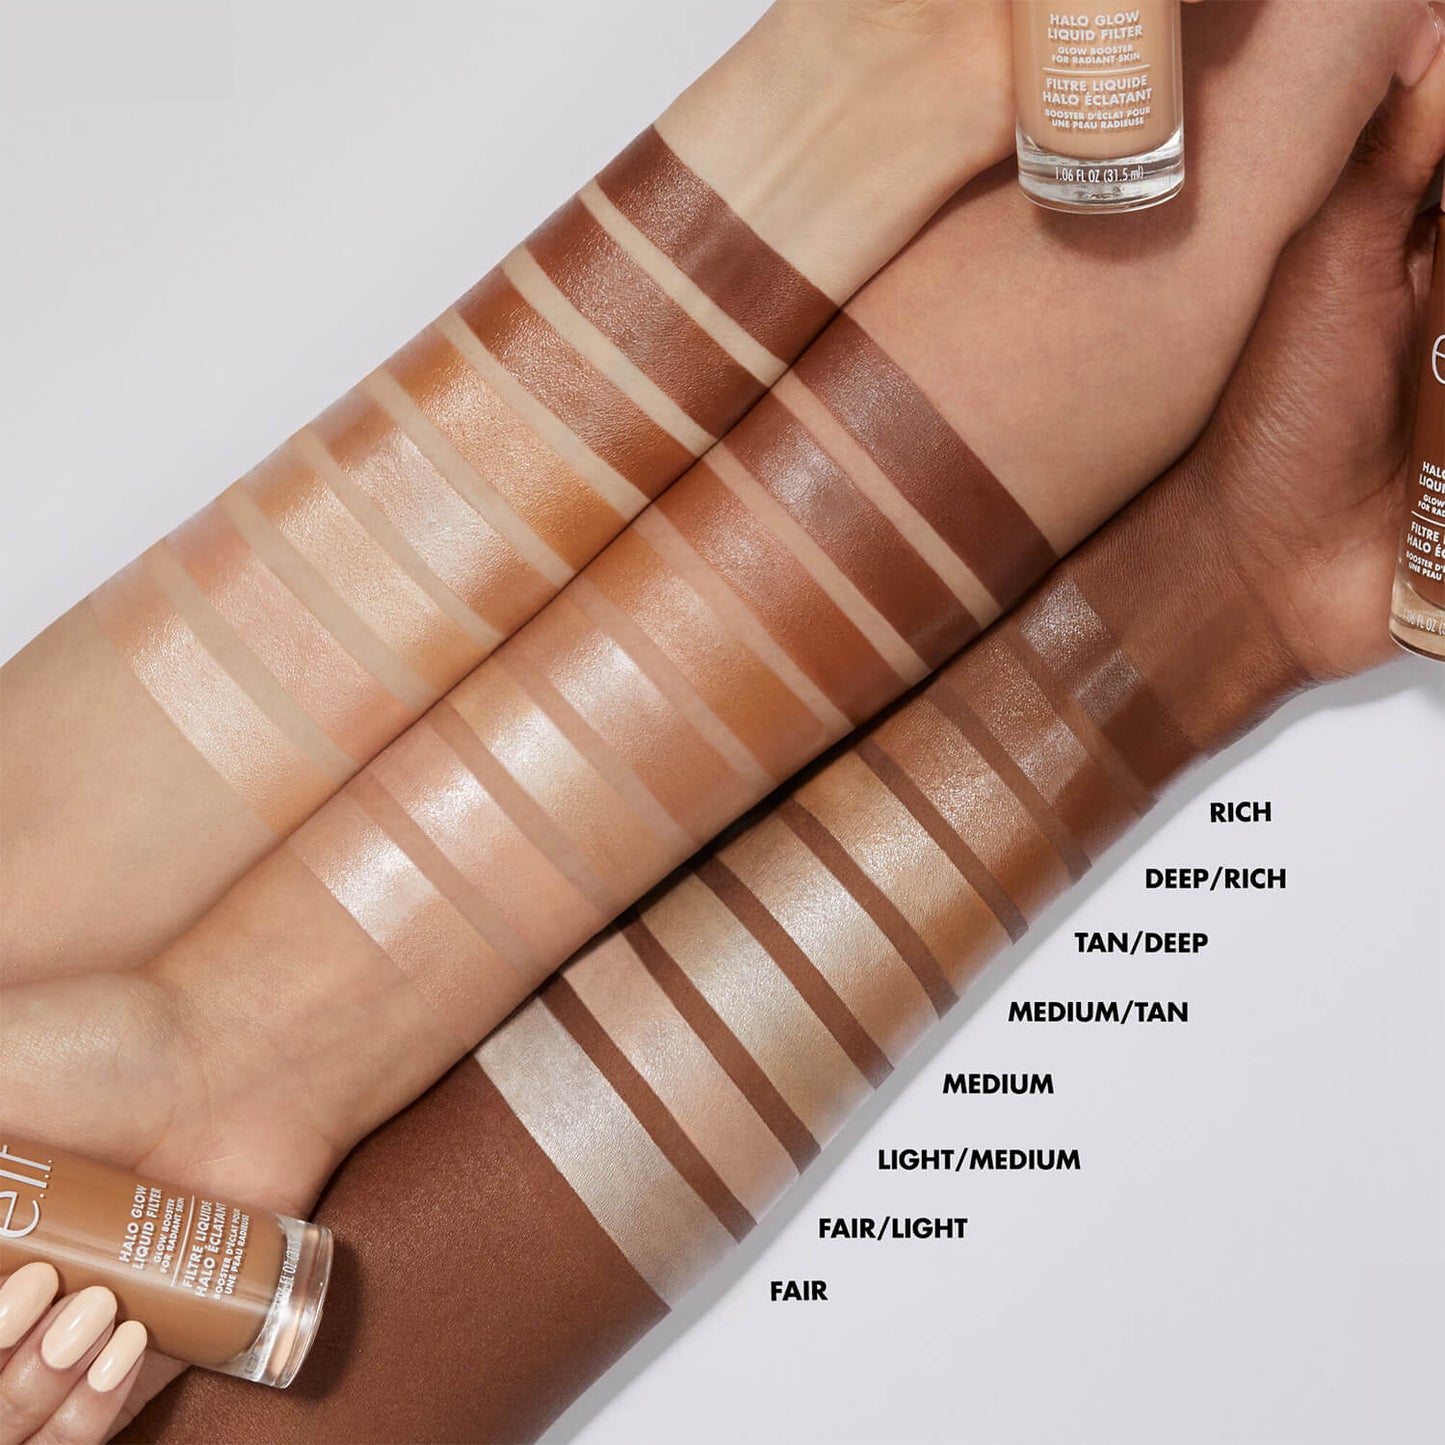 swatch of elf halo glow liquid filter highlighter available at Heygirl.pk for delivery in Pakistan